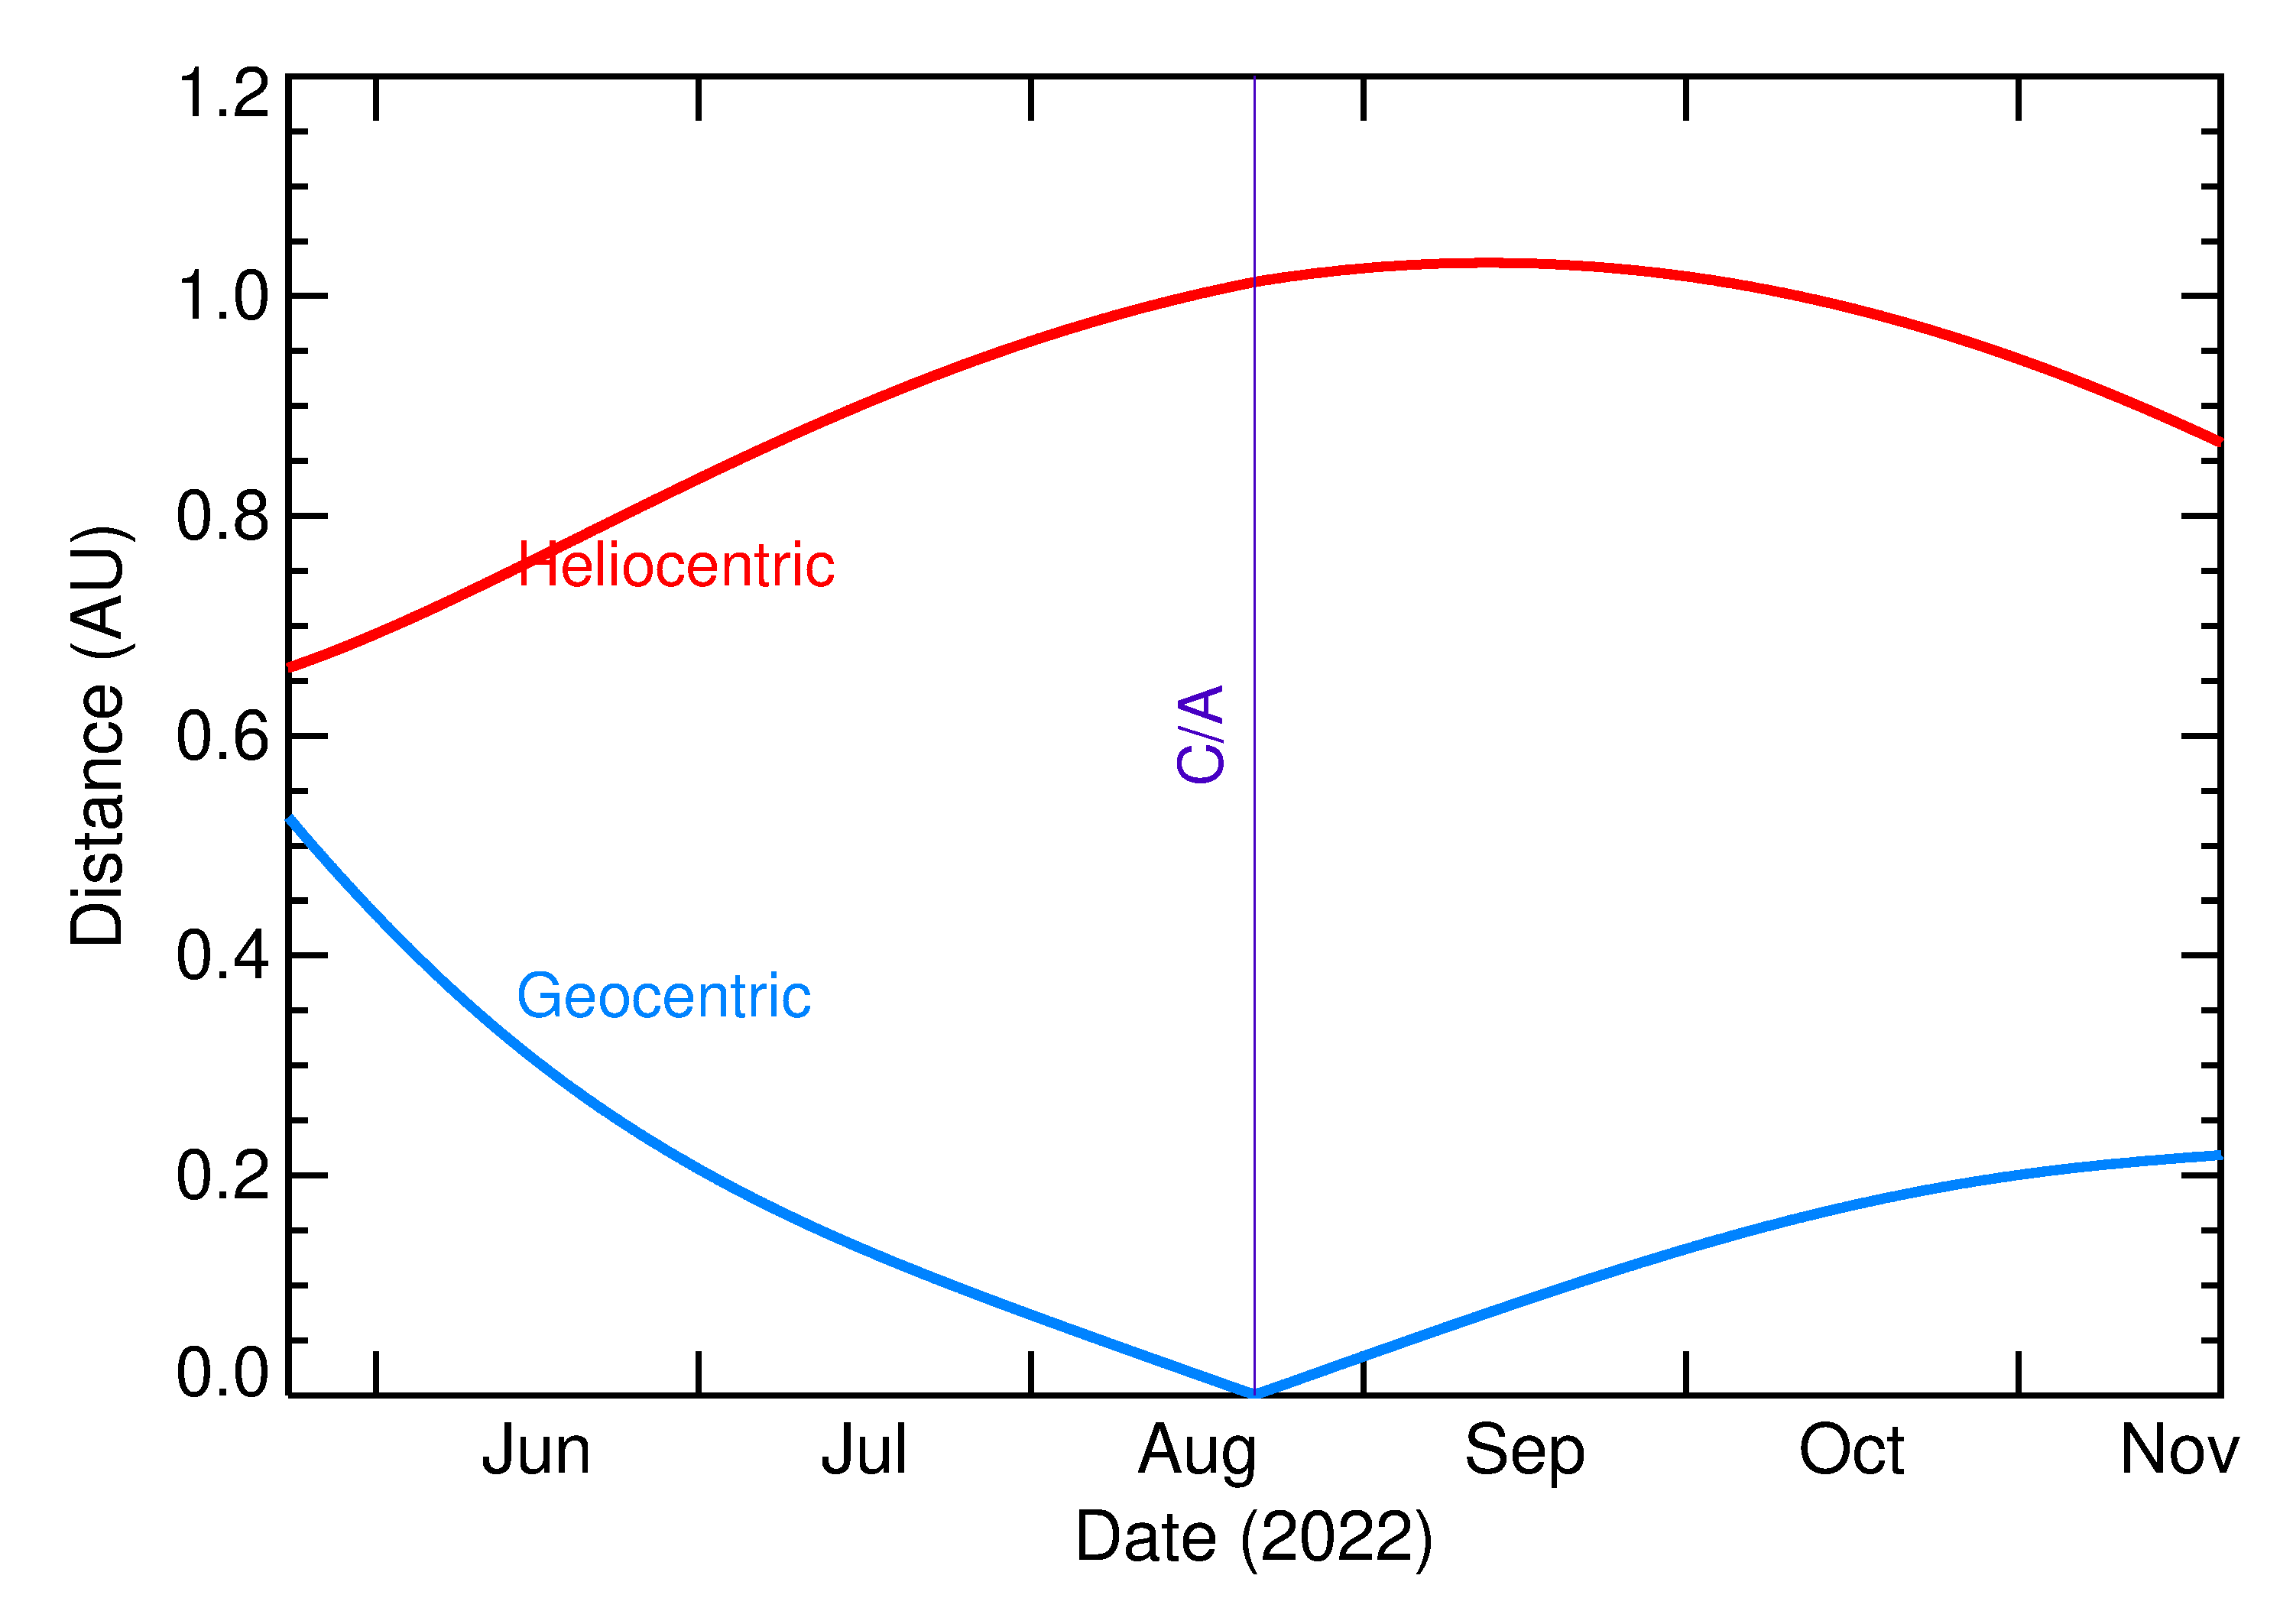 Heliocentric and Geocentric Distances of 2022 QE1 in the months around closest approach